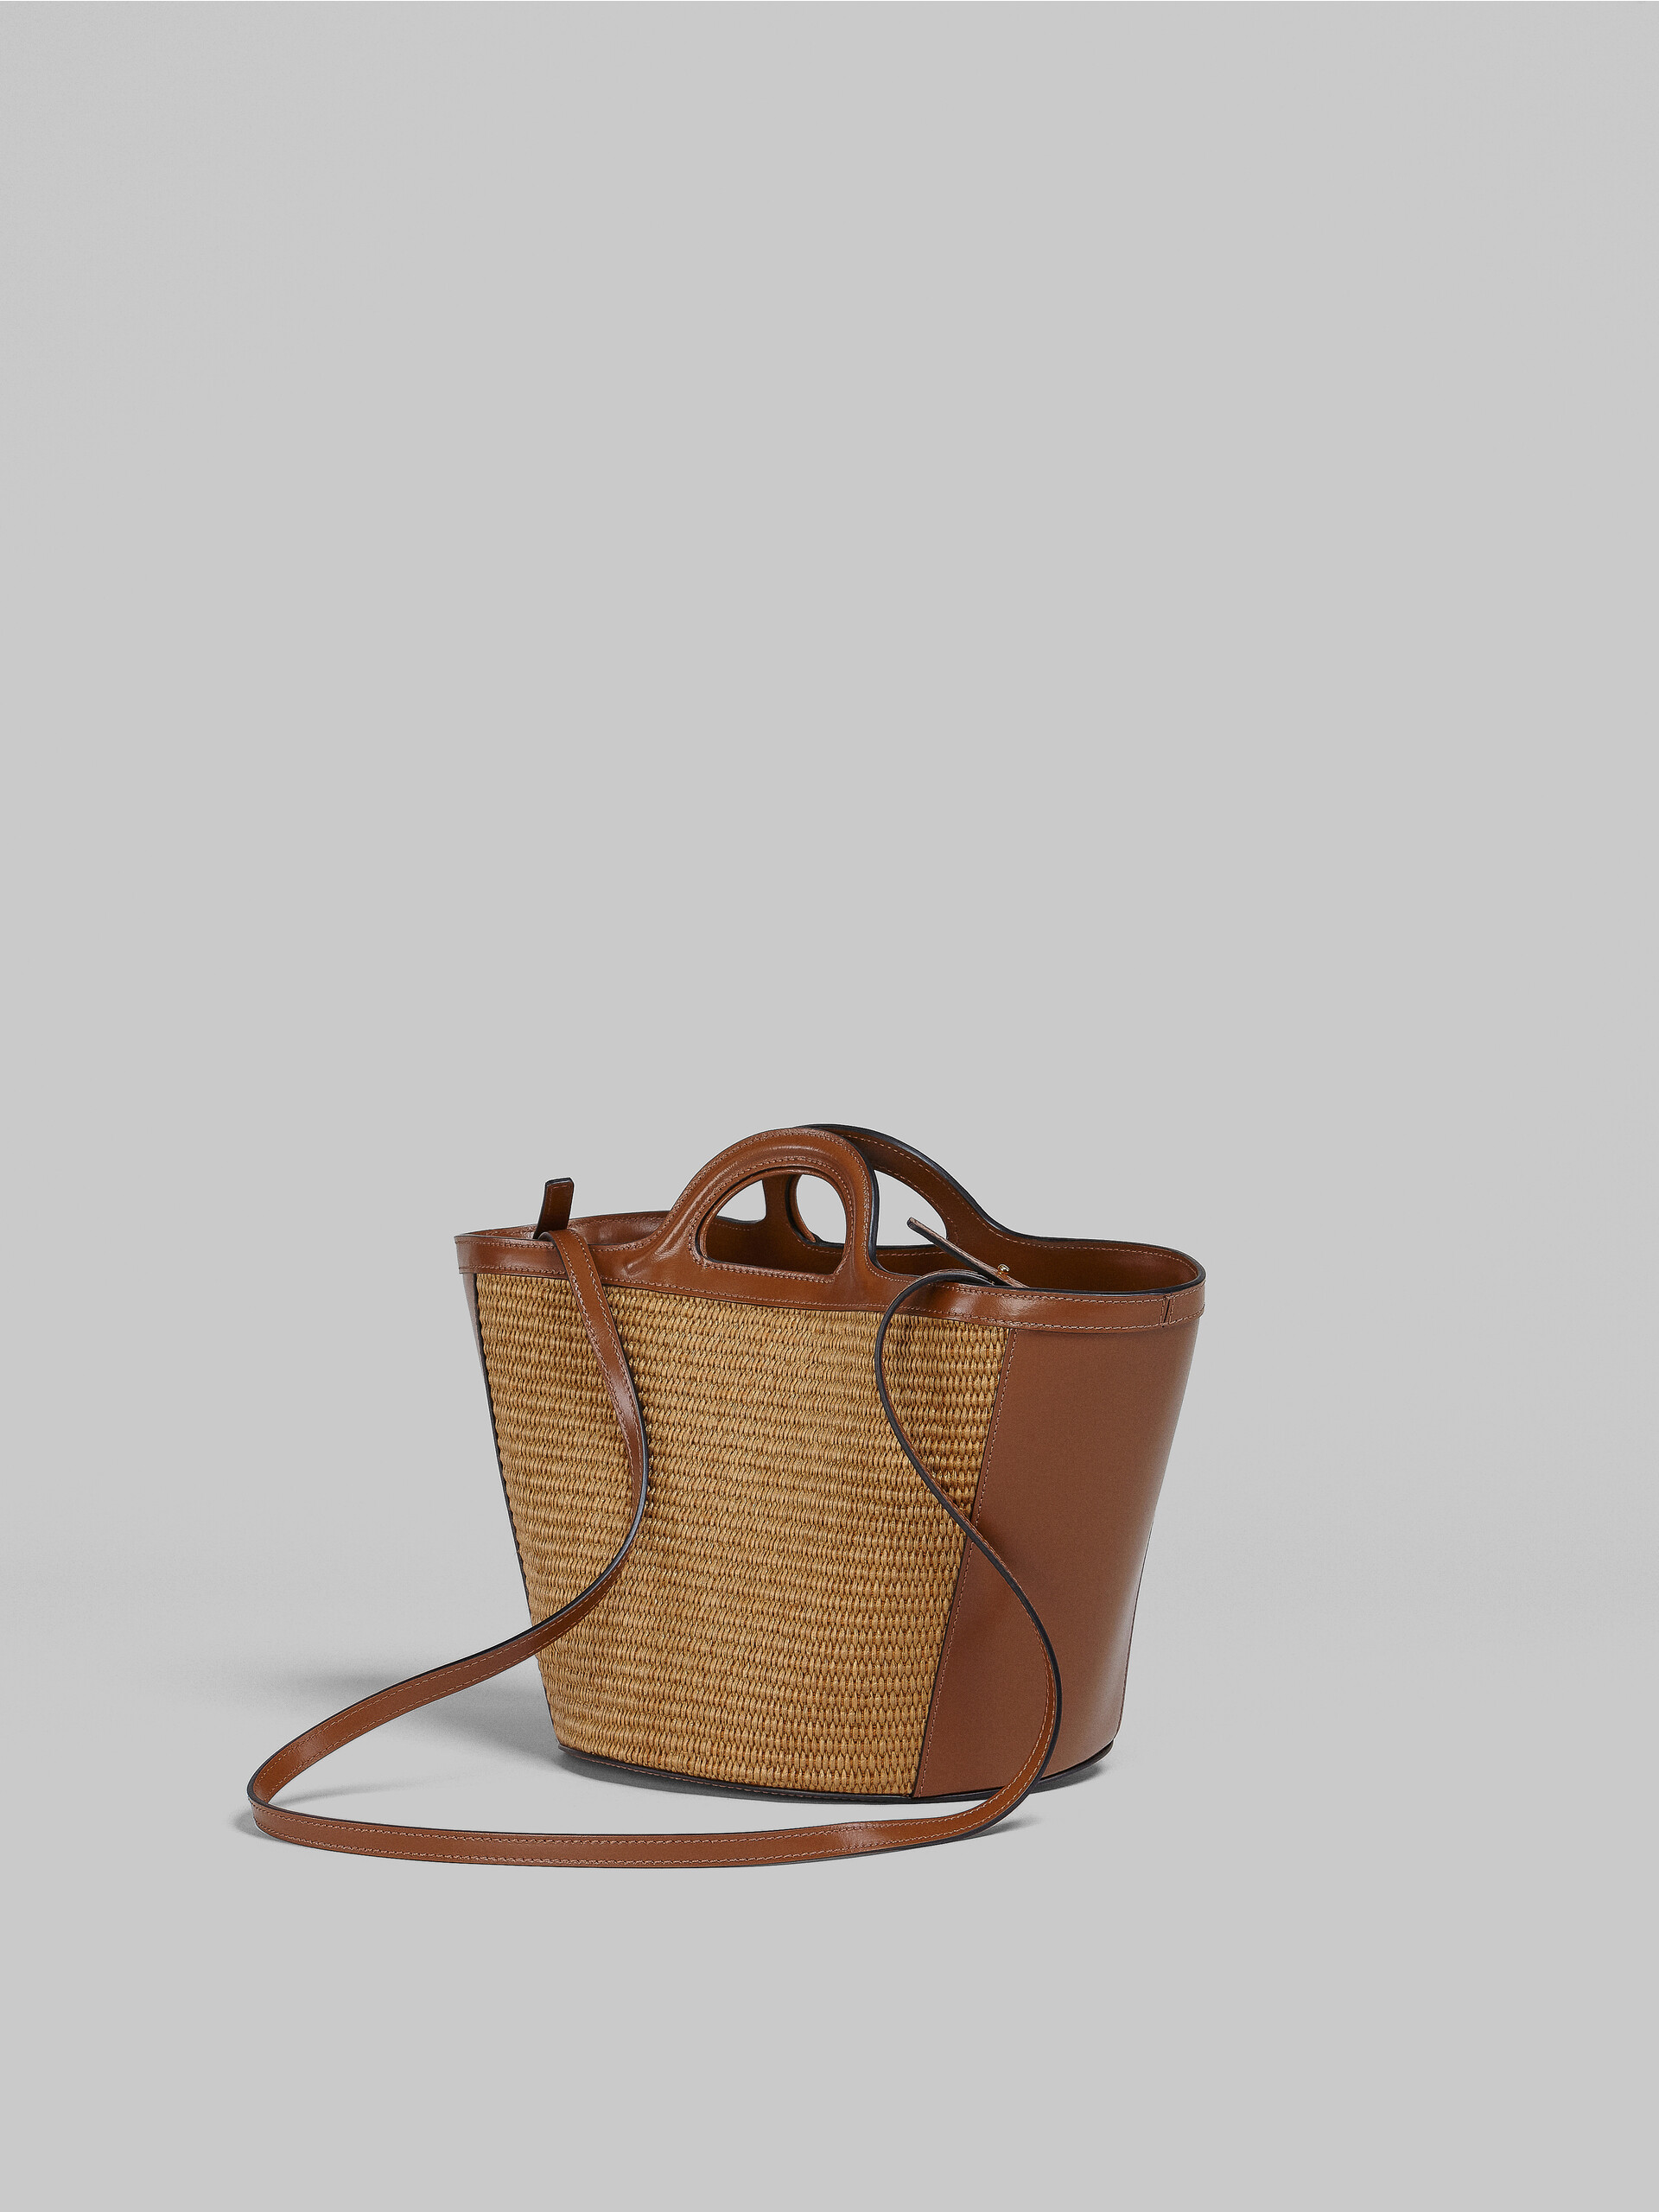 Tropicalia Small Bag in brown leather and raffia-effect fabric - Handbags - Image 3